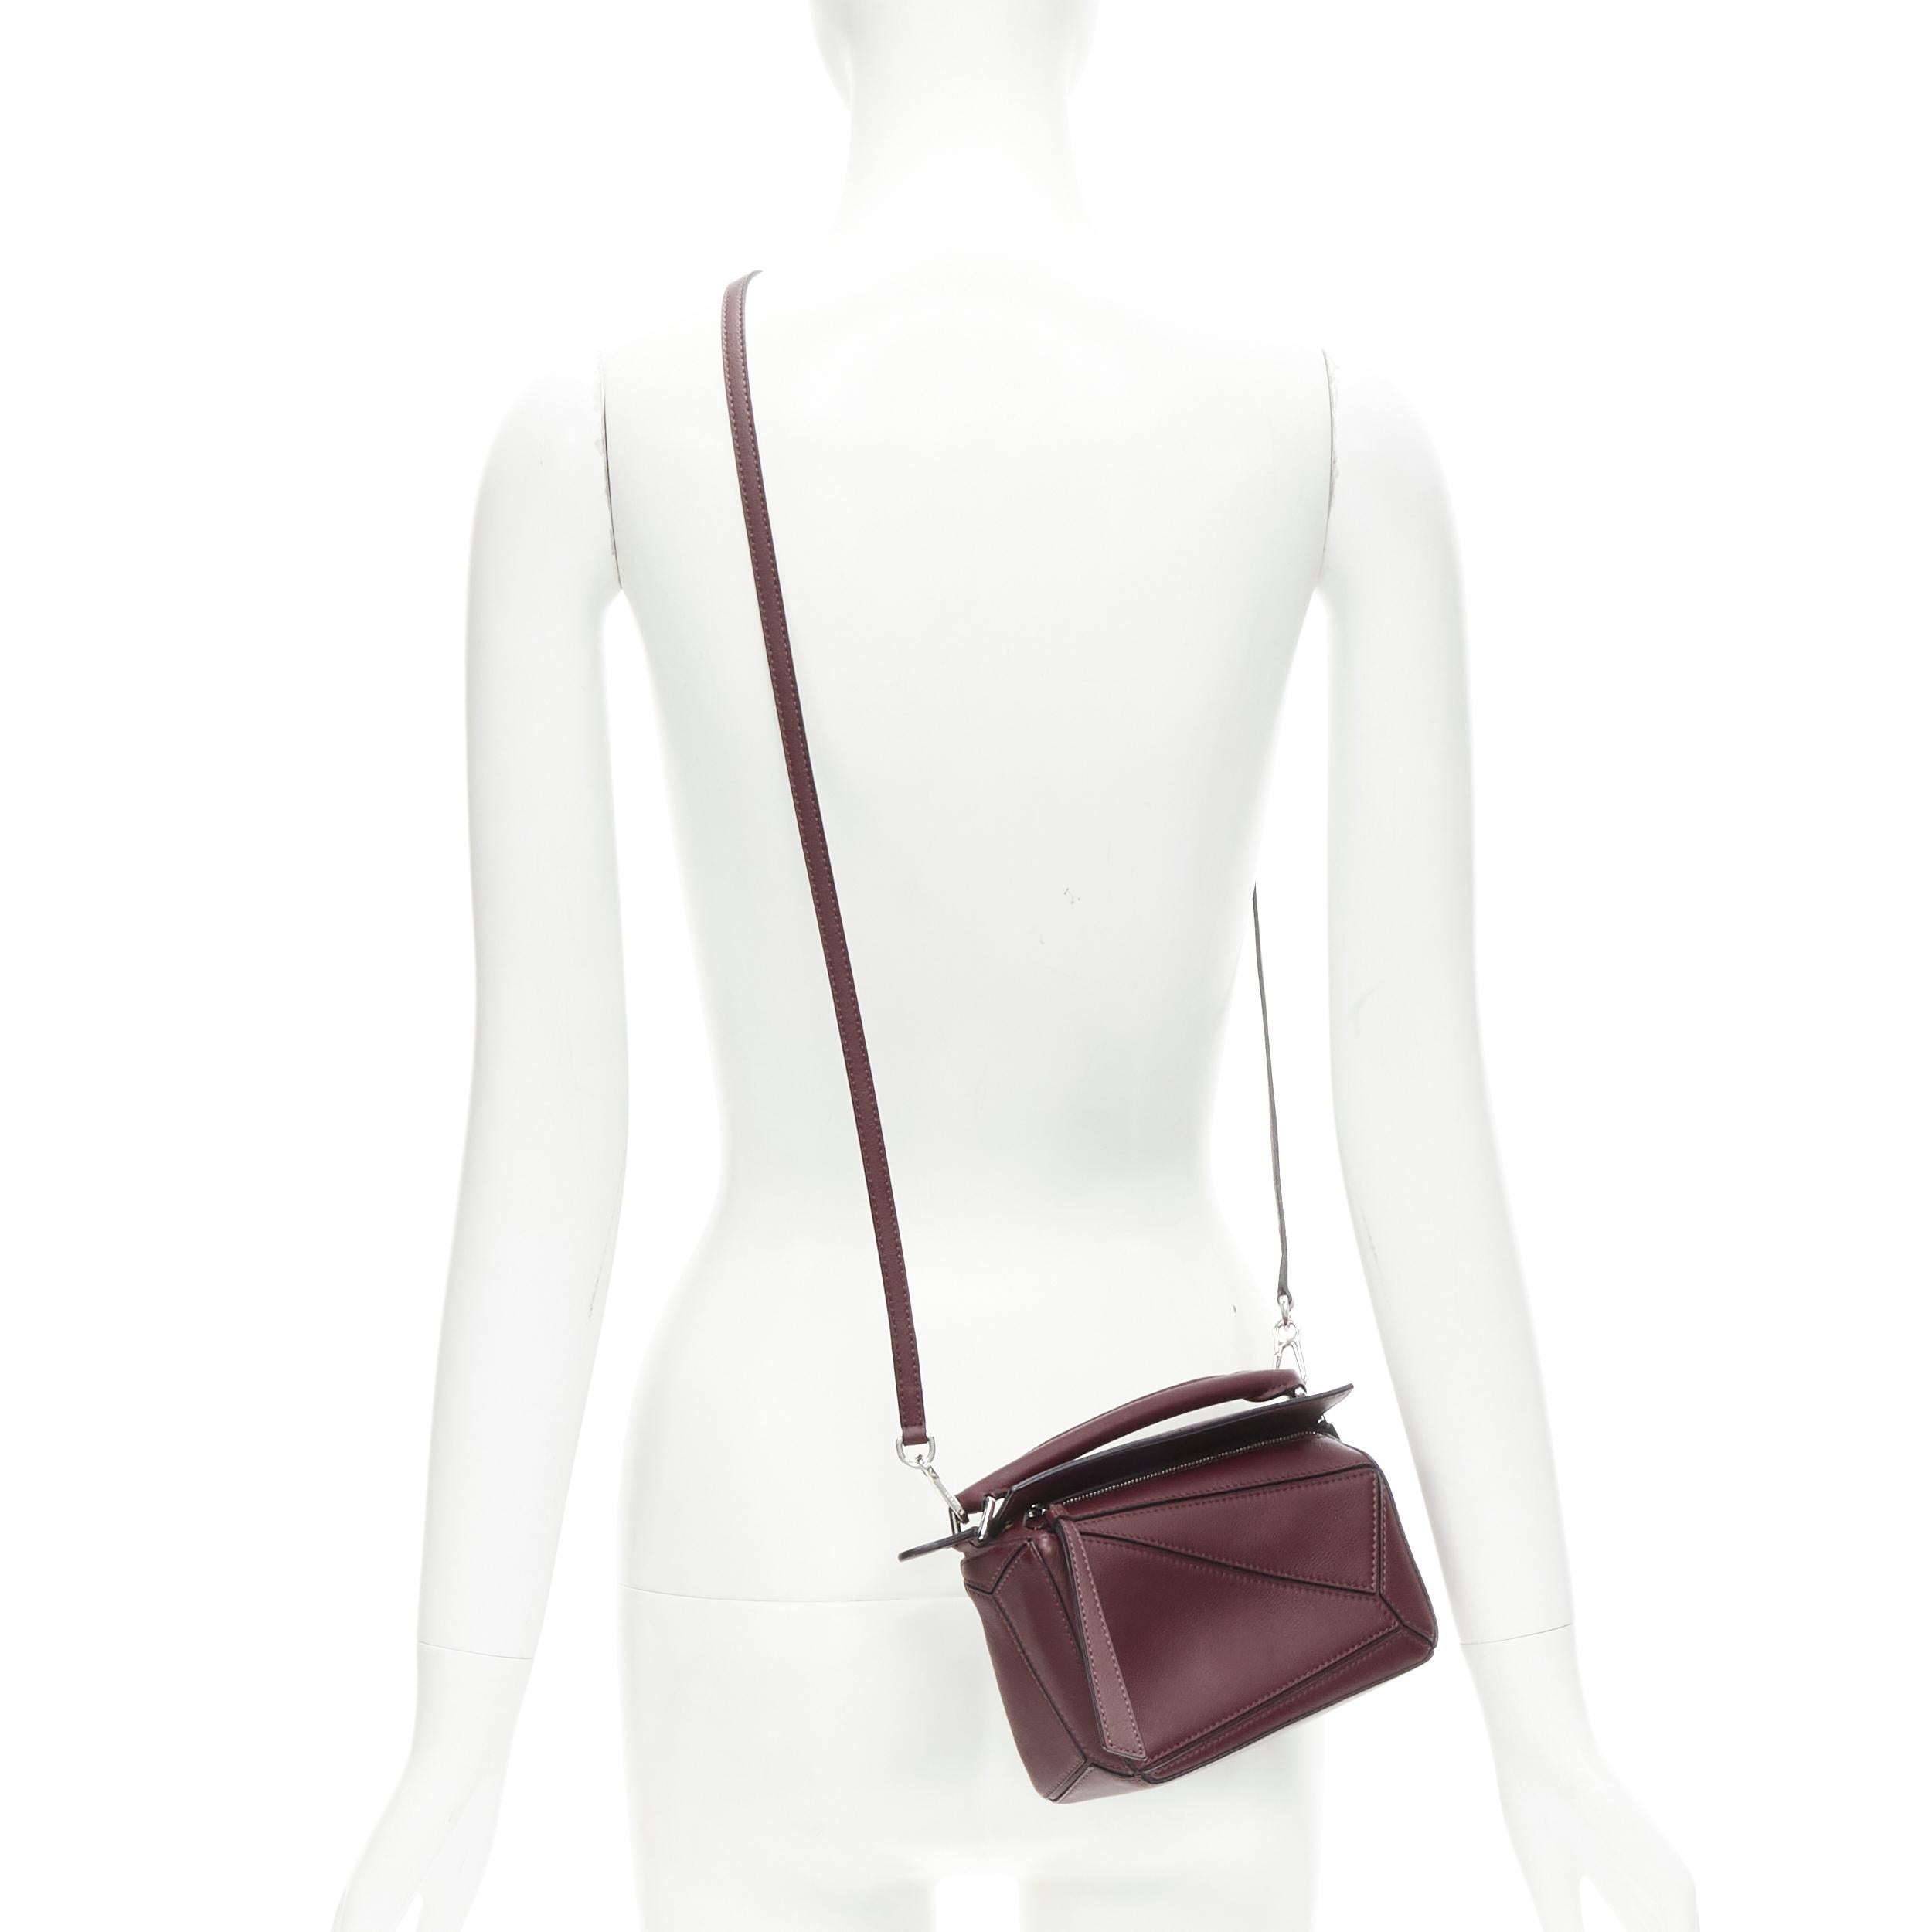 LOEWE Mini Puzzle burgundy red leather 2 way crossbody bag 
Reference: LNKO/A02000 
Brand: Loewe 
Designer: JW Anderson 
Model: Mini Puzzle 
Material: Leather 
Color: Burgundy 
Pattern: Solid 
Closure: Zip 
Extra Detail: Silver-tone hardware.